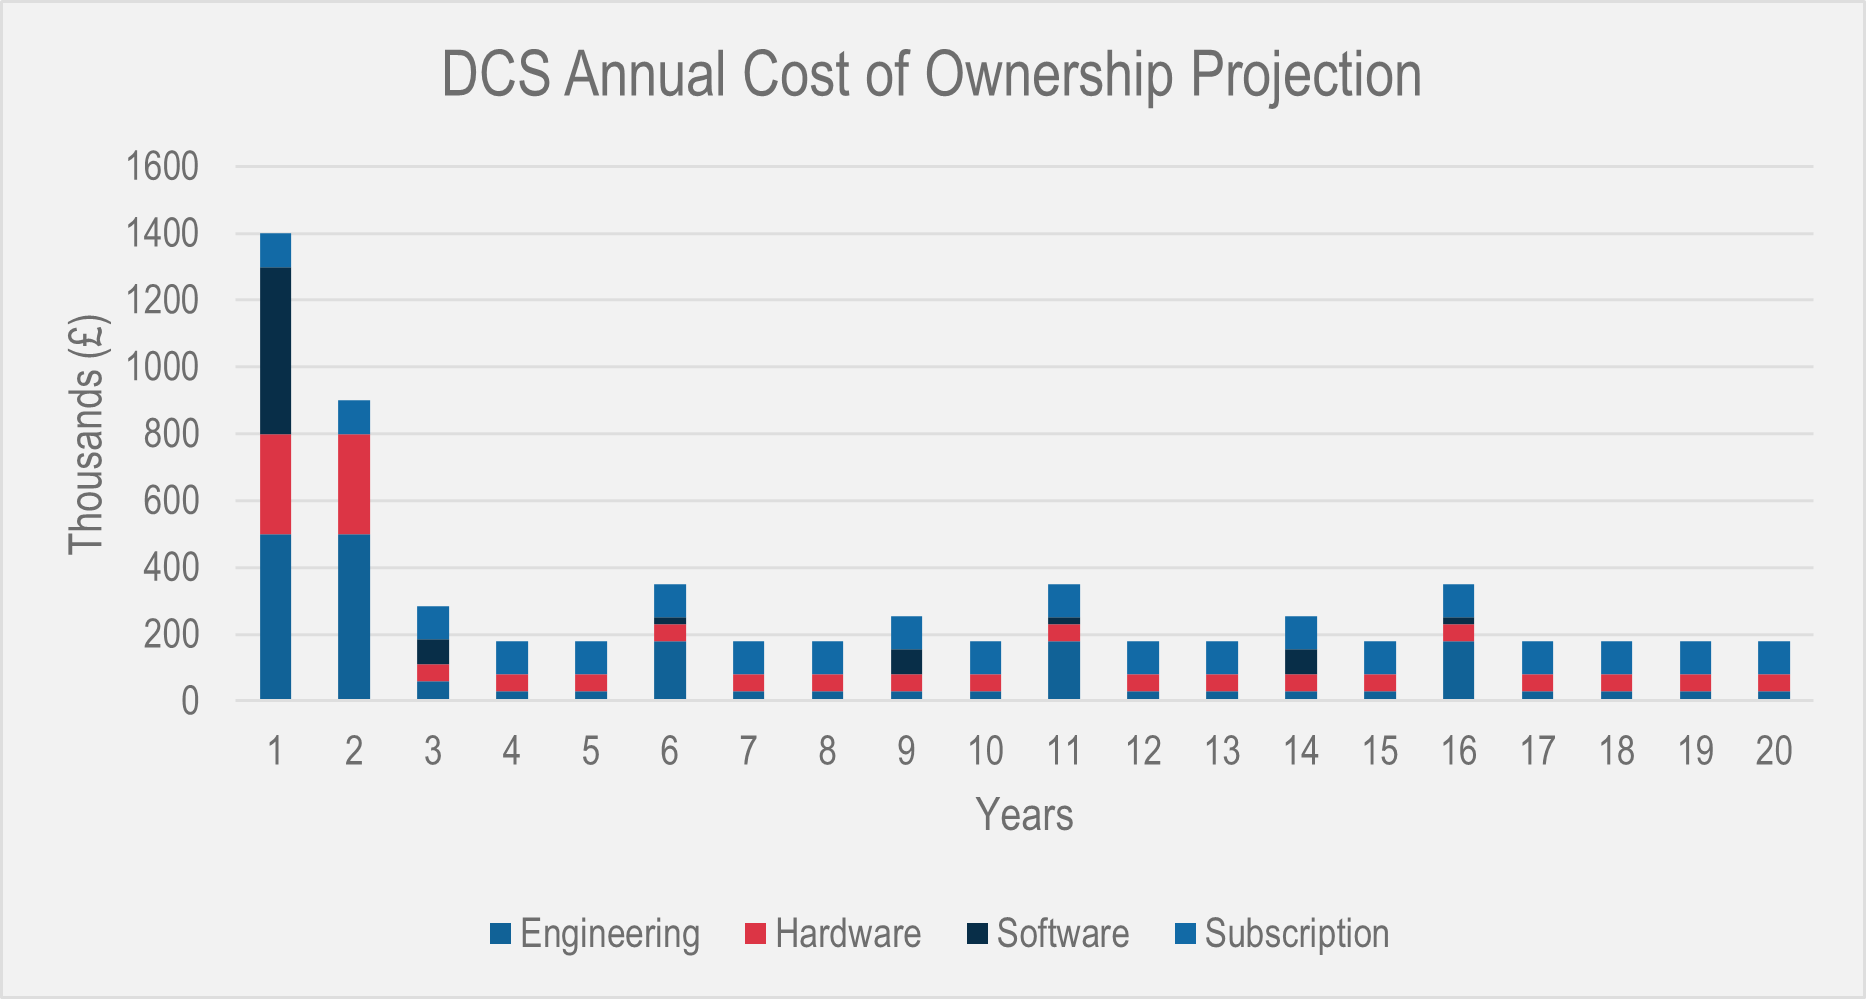 DCS annual cost of ownership projection